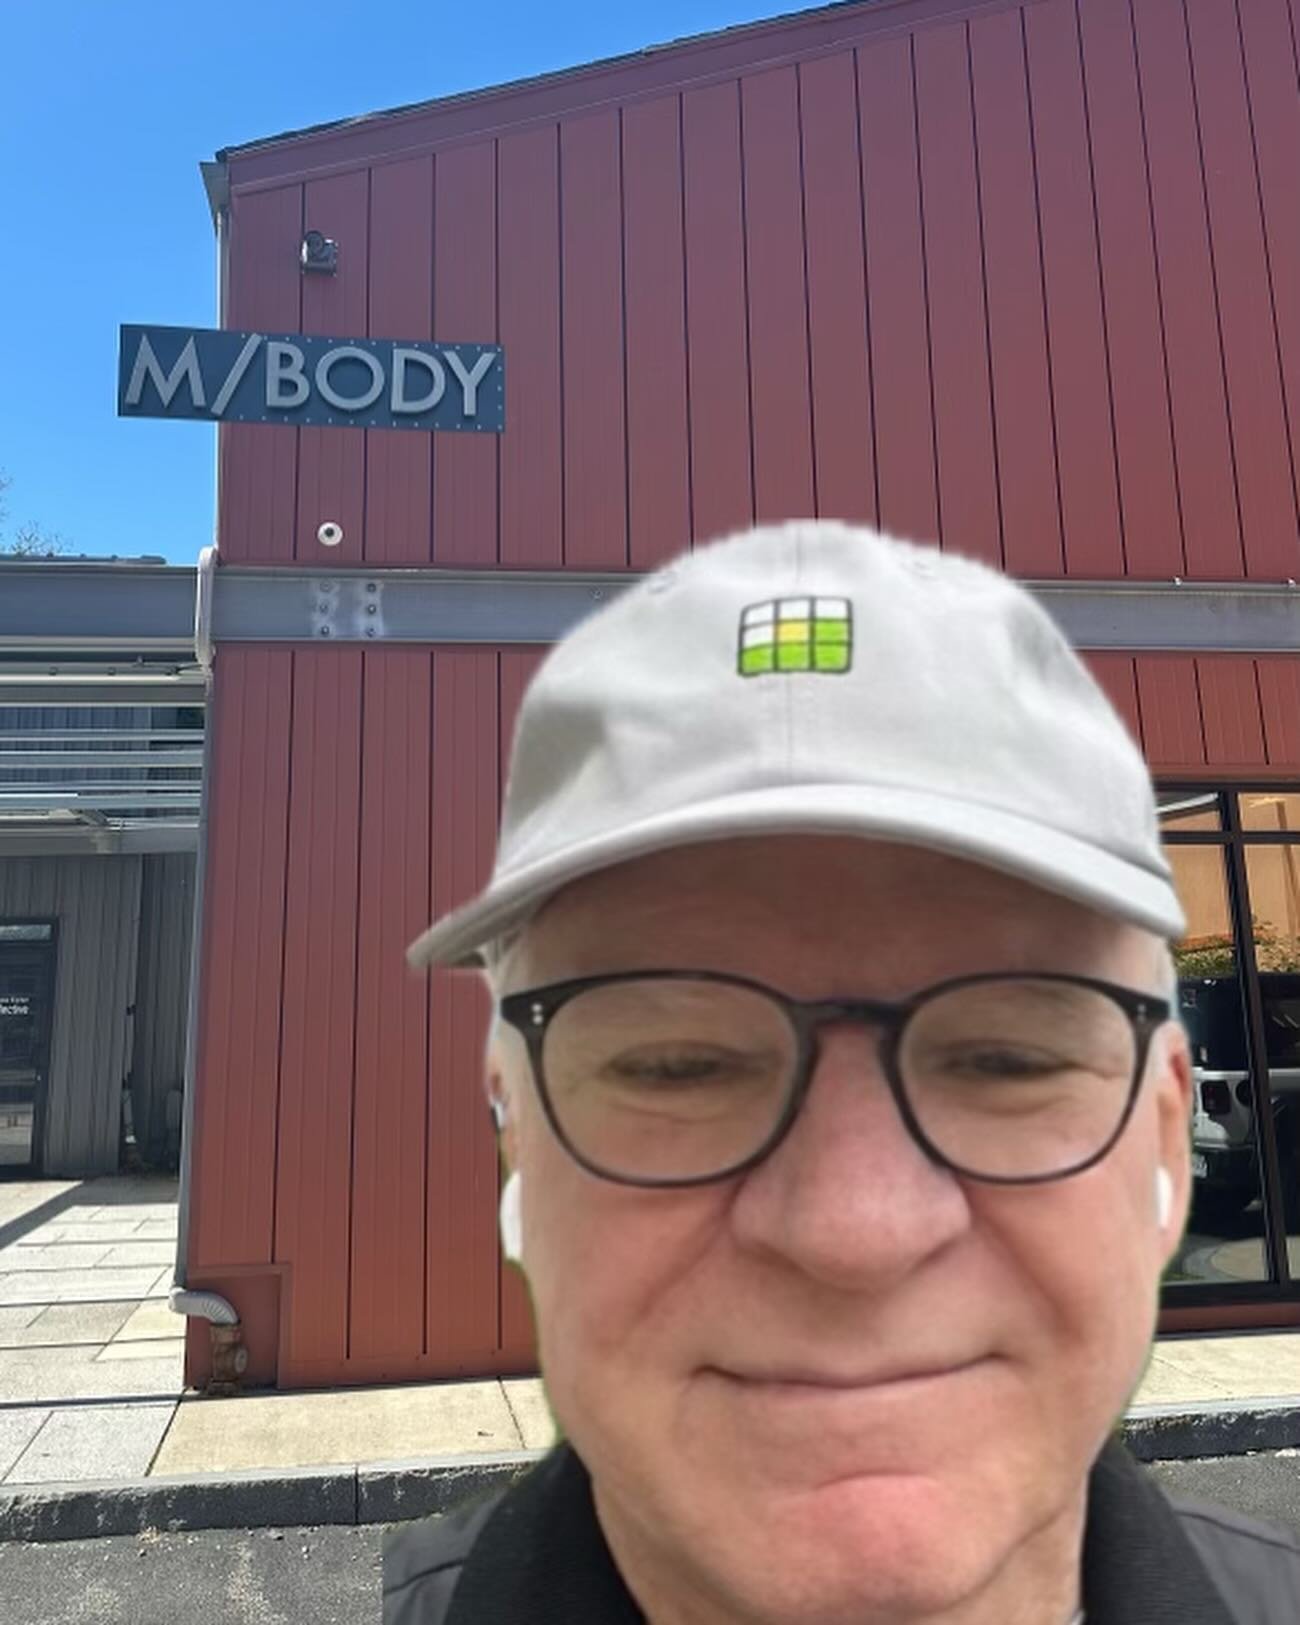 Steve Martin got an incredible workout this morning #rochesterny #stevemartin #mpoweryourself #mbracelife #mbodyrochester